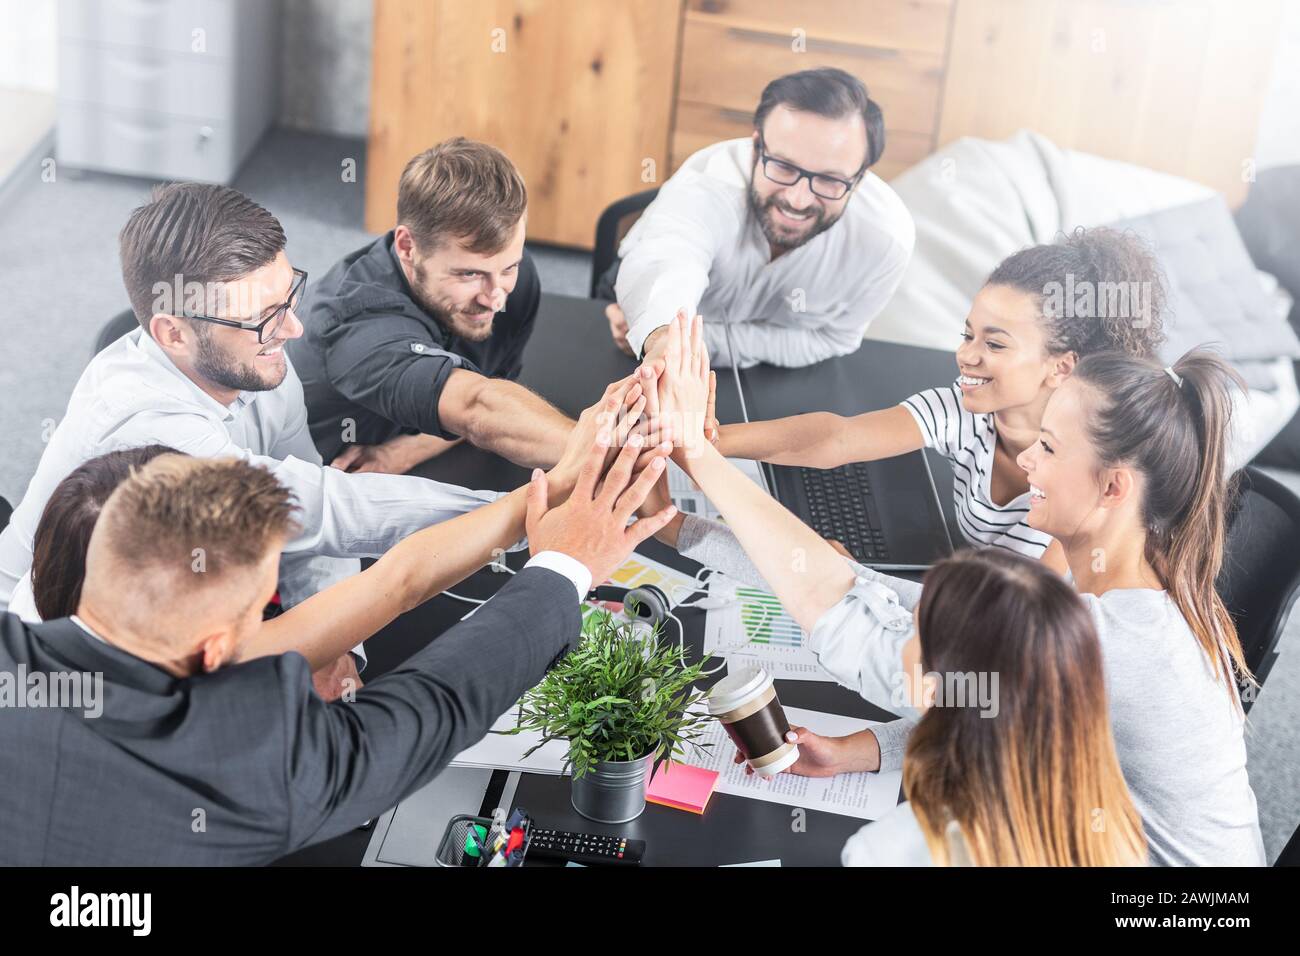 Business people happy showing team work and giving five in office. Teamwork concepts. Stock Photo